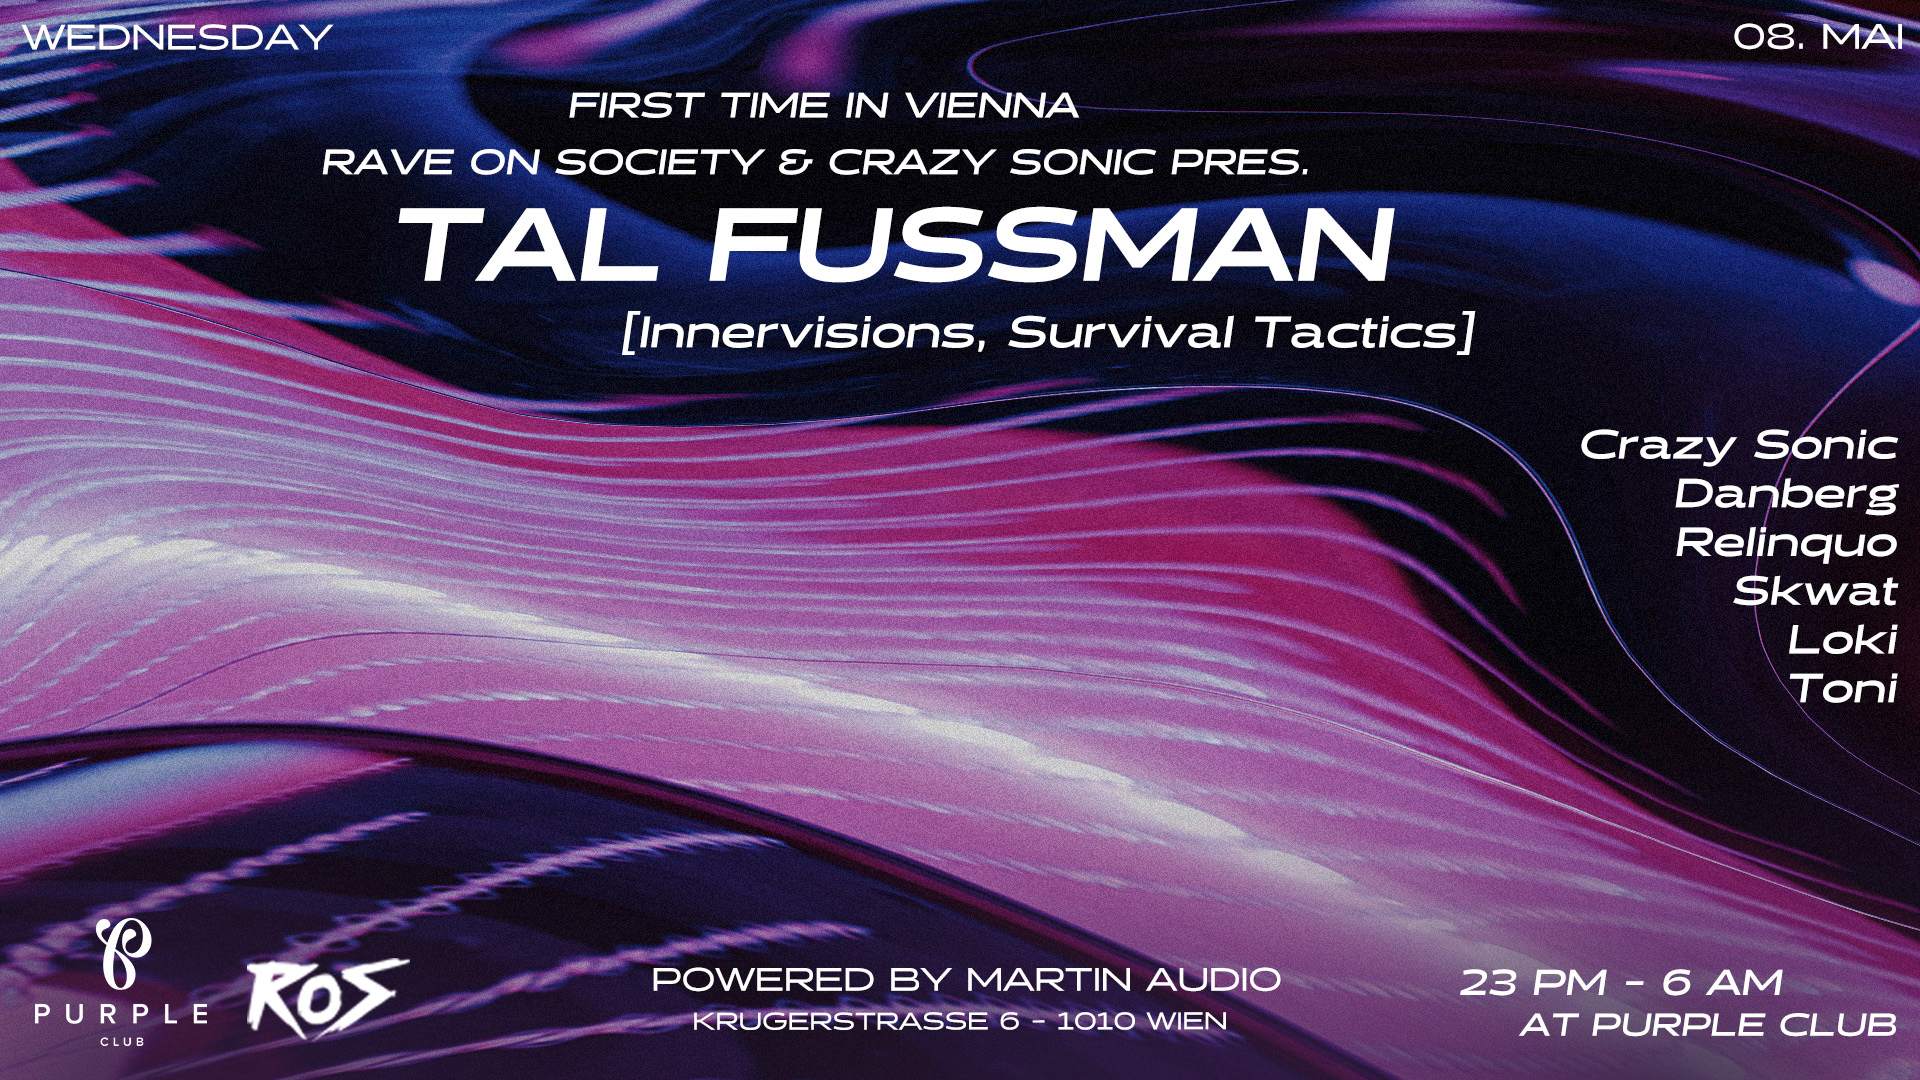 Tal Fussman first time in Vienna by RaveOnSociety & Crazy Sonic - フライヤー表